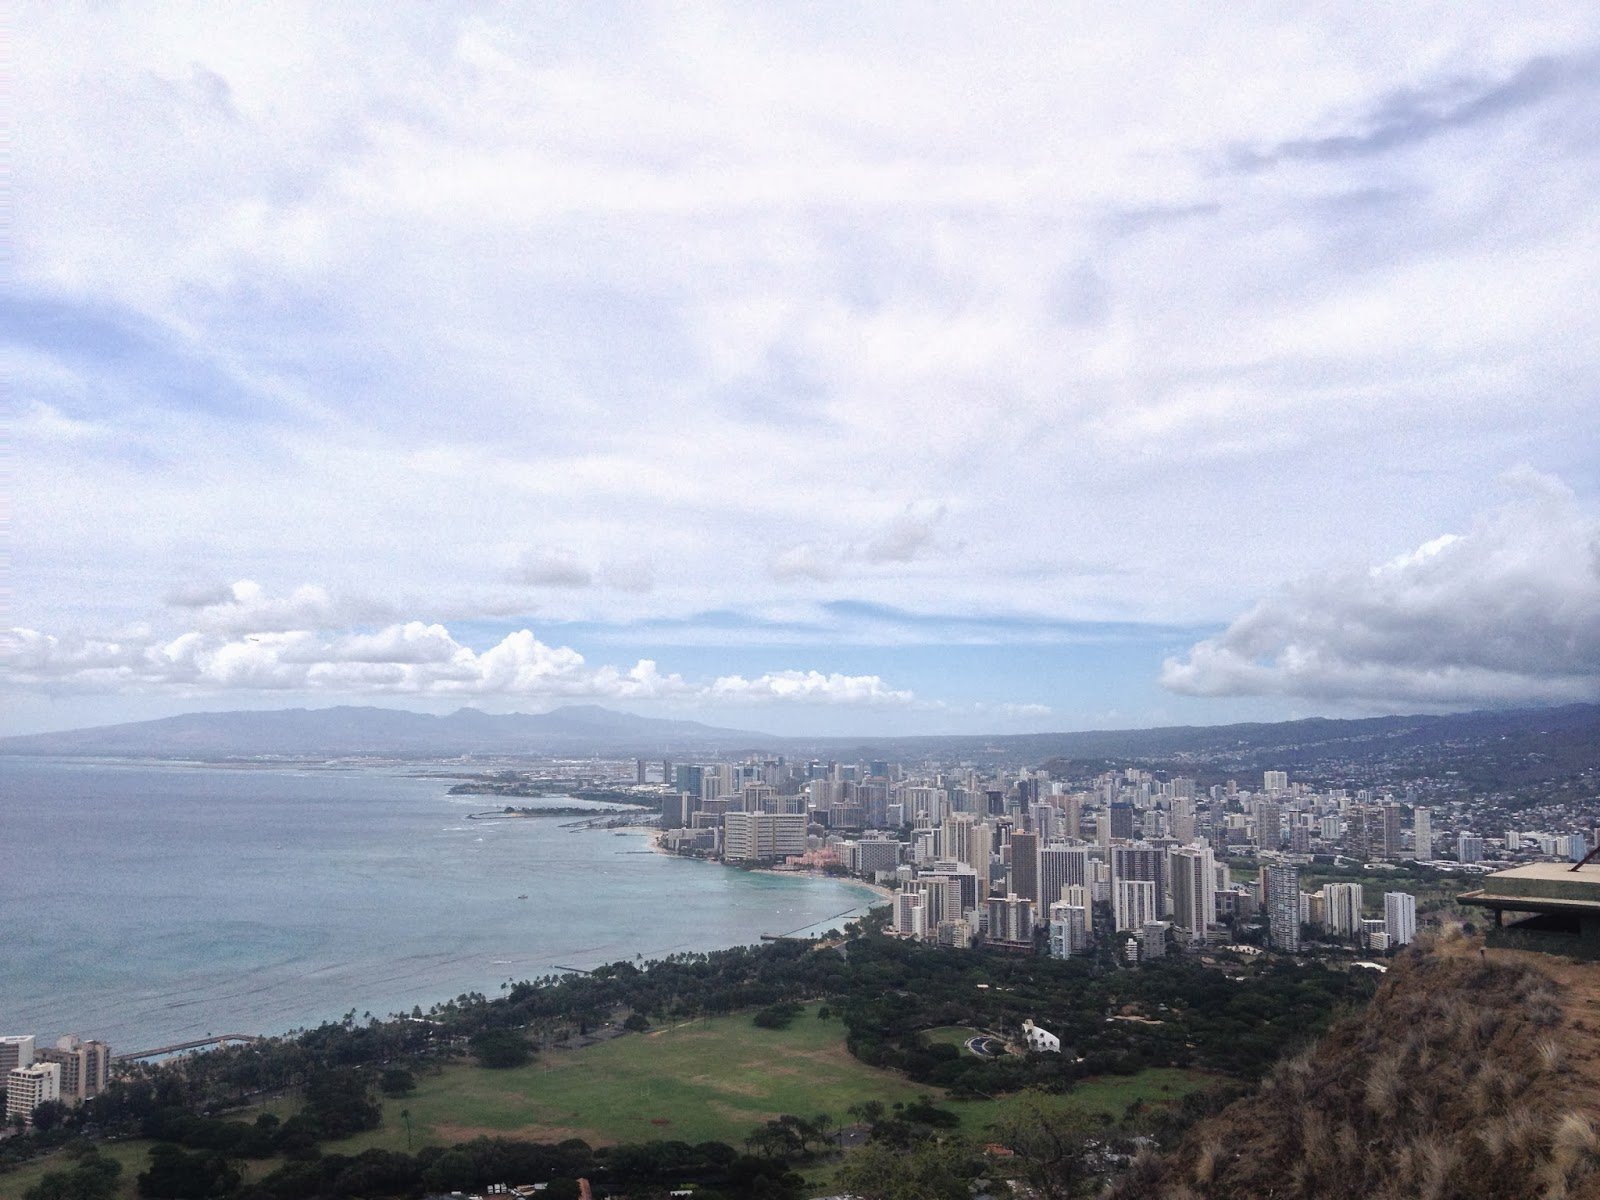 A view of Honolulu from the rim of the Diamond Head crater